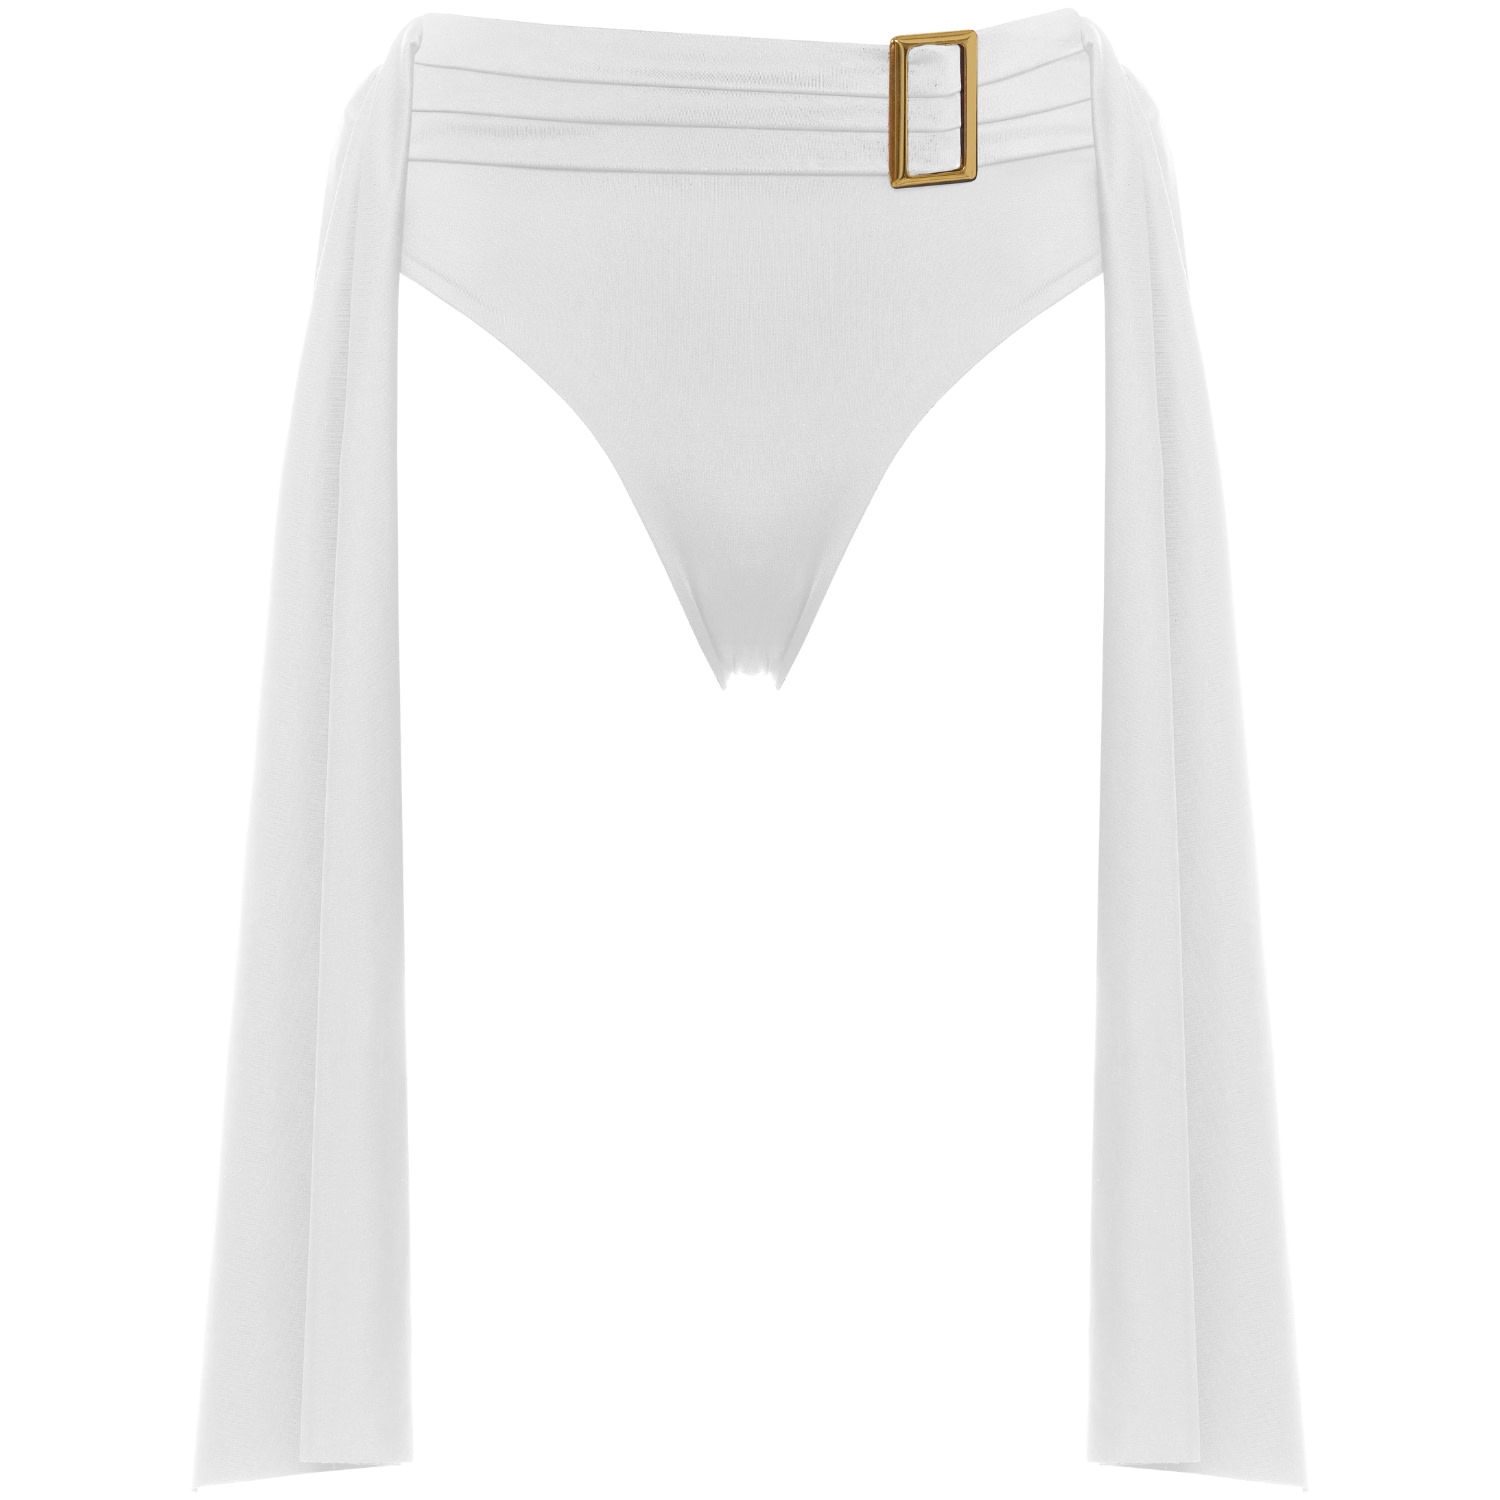 Antoninias Women's Amaze High Waisted Swimwear Bottom With Decorative Belt And Golden Buckle In White In Black